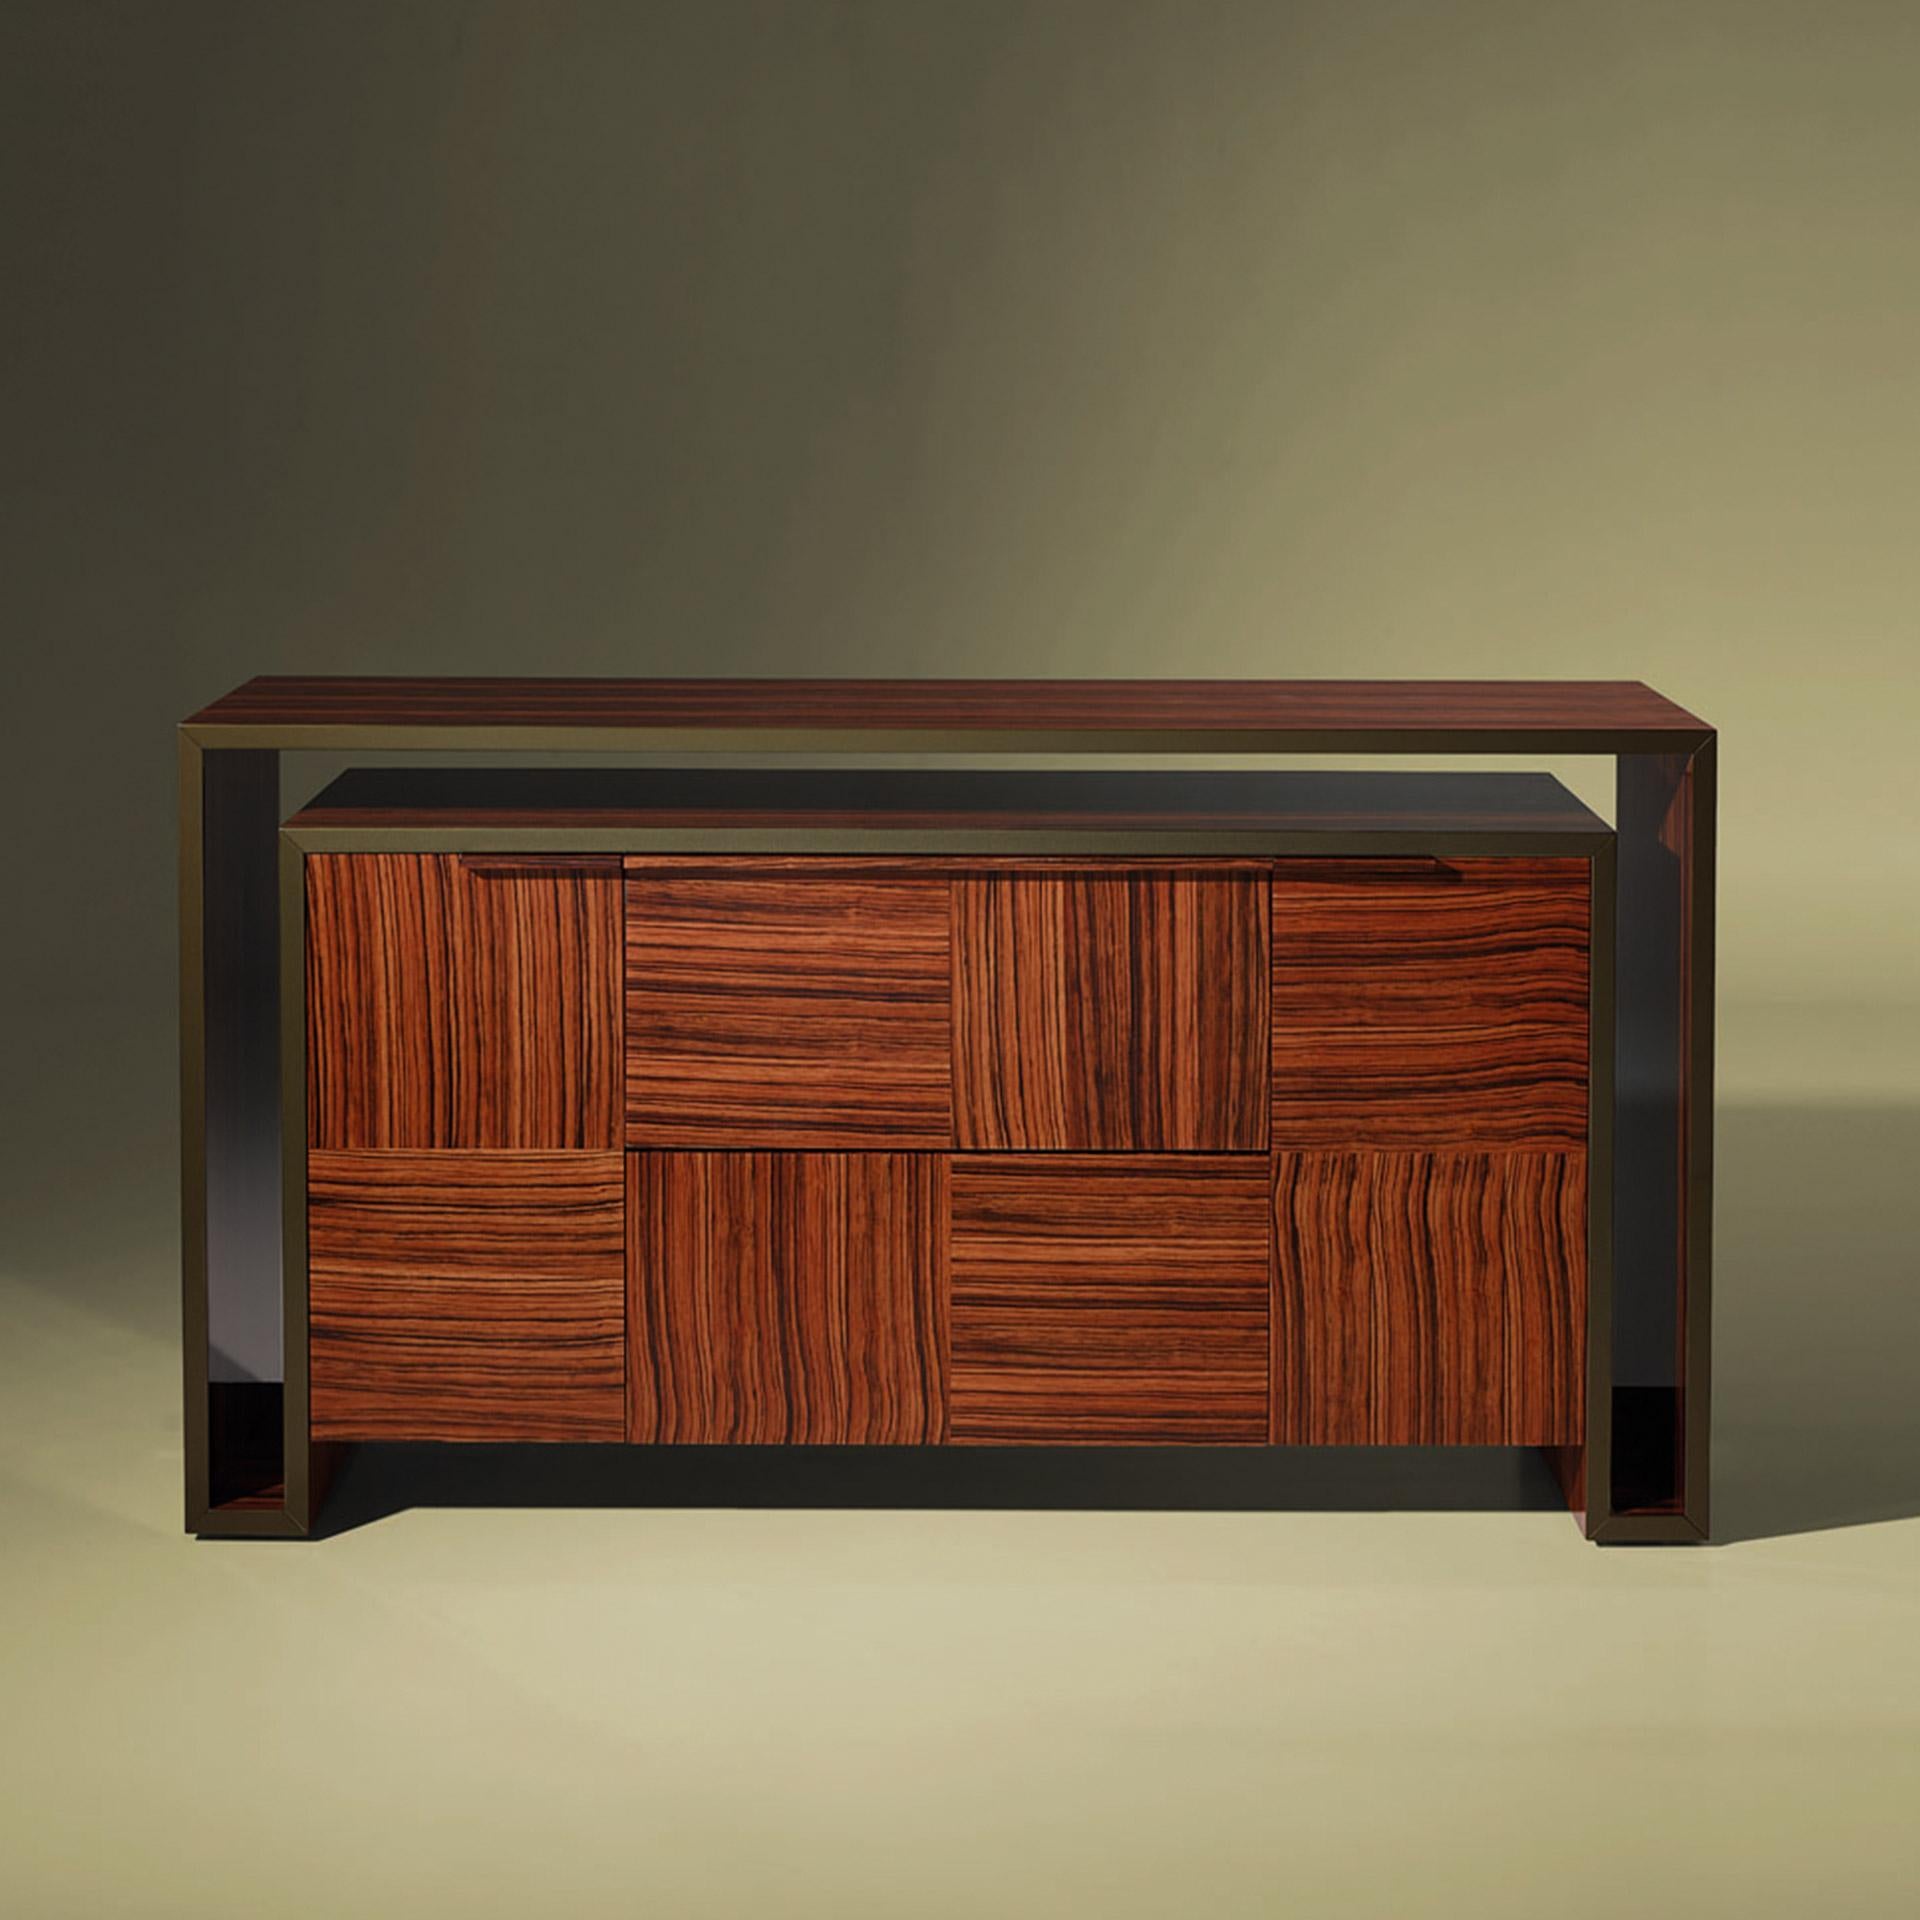  Sideboard in glossy Lignum Vitae.

Bespoke / Customizable
Identical shapes with different sizes and finishings.
All RAL colors available. (Mate / Half Gloss / Gloss).